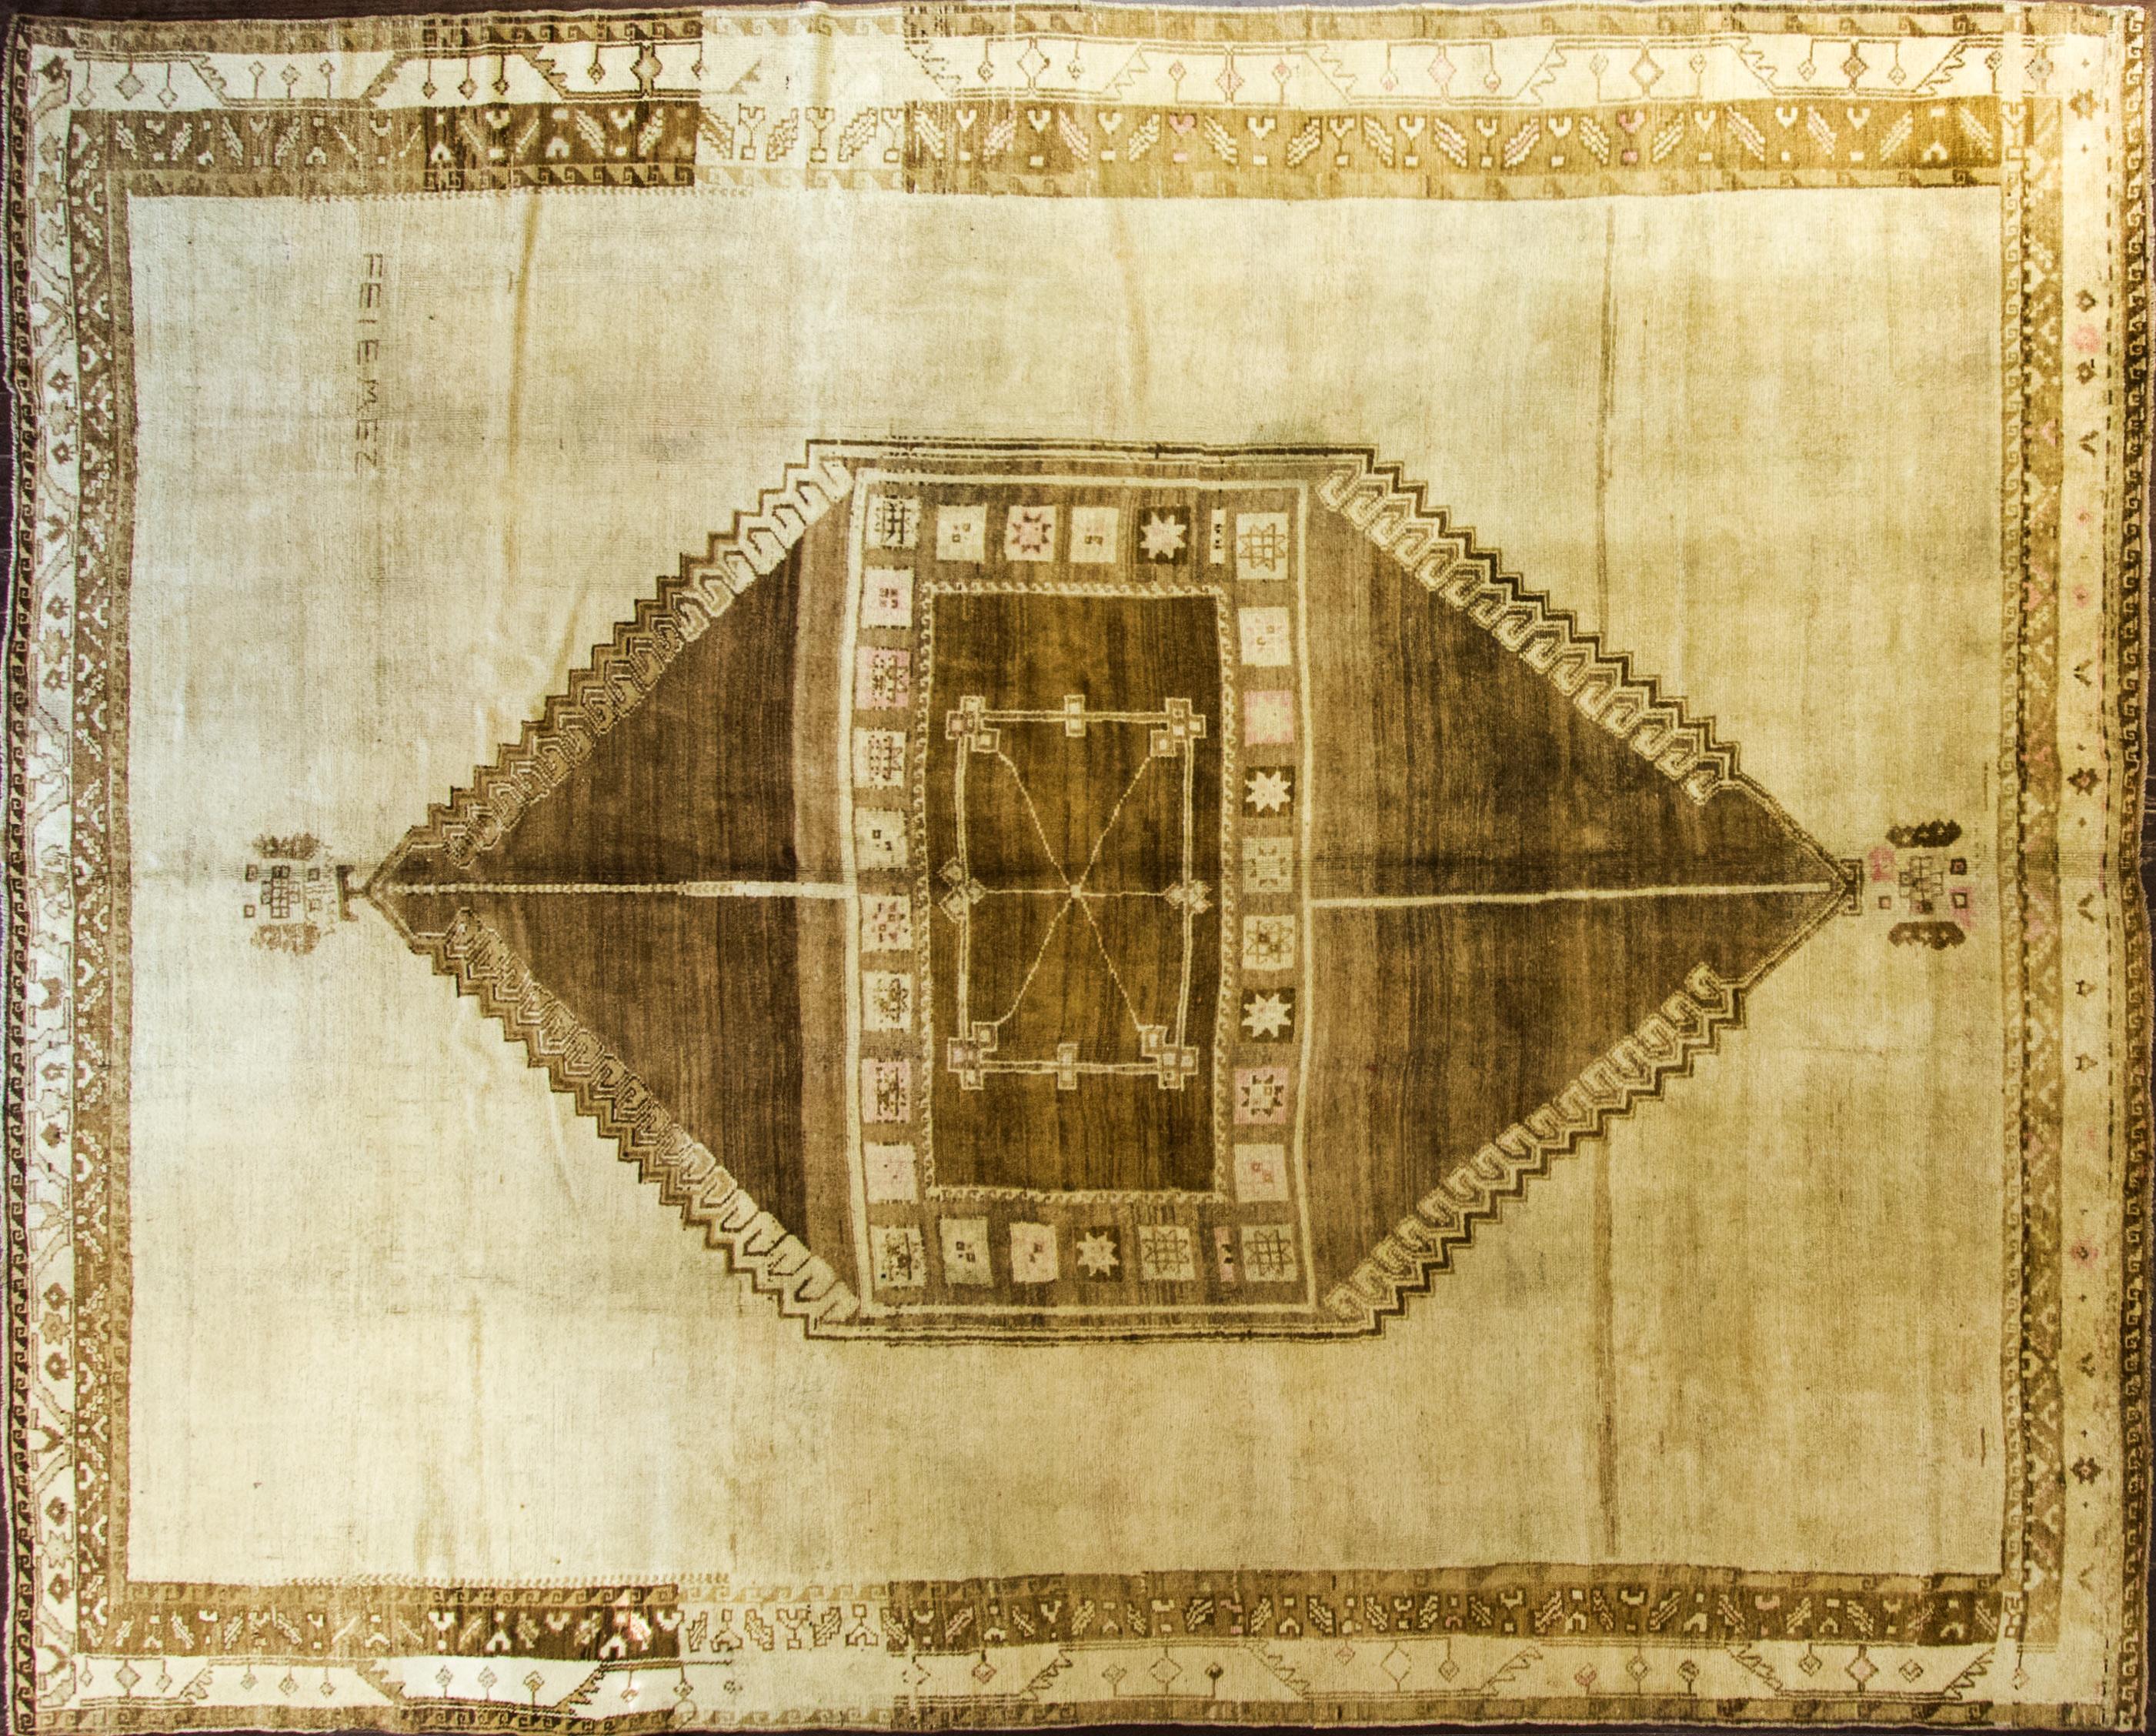 Pleasant and amazing antique Oushak carpet with unique colors and excellent size with great fine weave.
Ushak rugs have been in production since the 15th century with superb wool and natural dyes. Unlike other Turkish rugs, Ushak rugs influenced